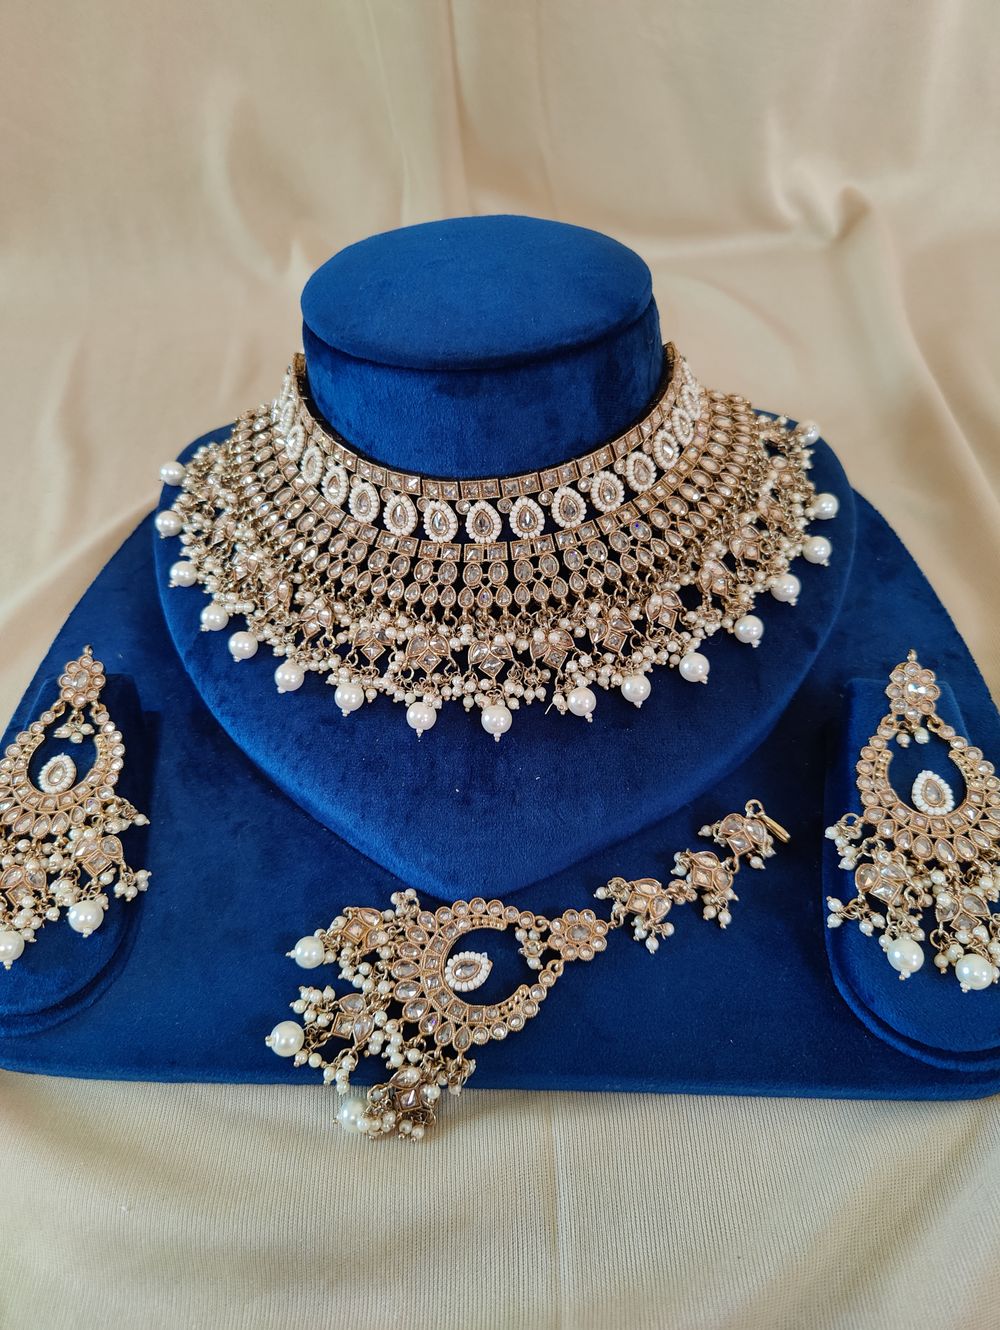 Photo From Jwelery - By Design by Shivani